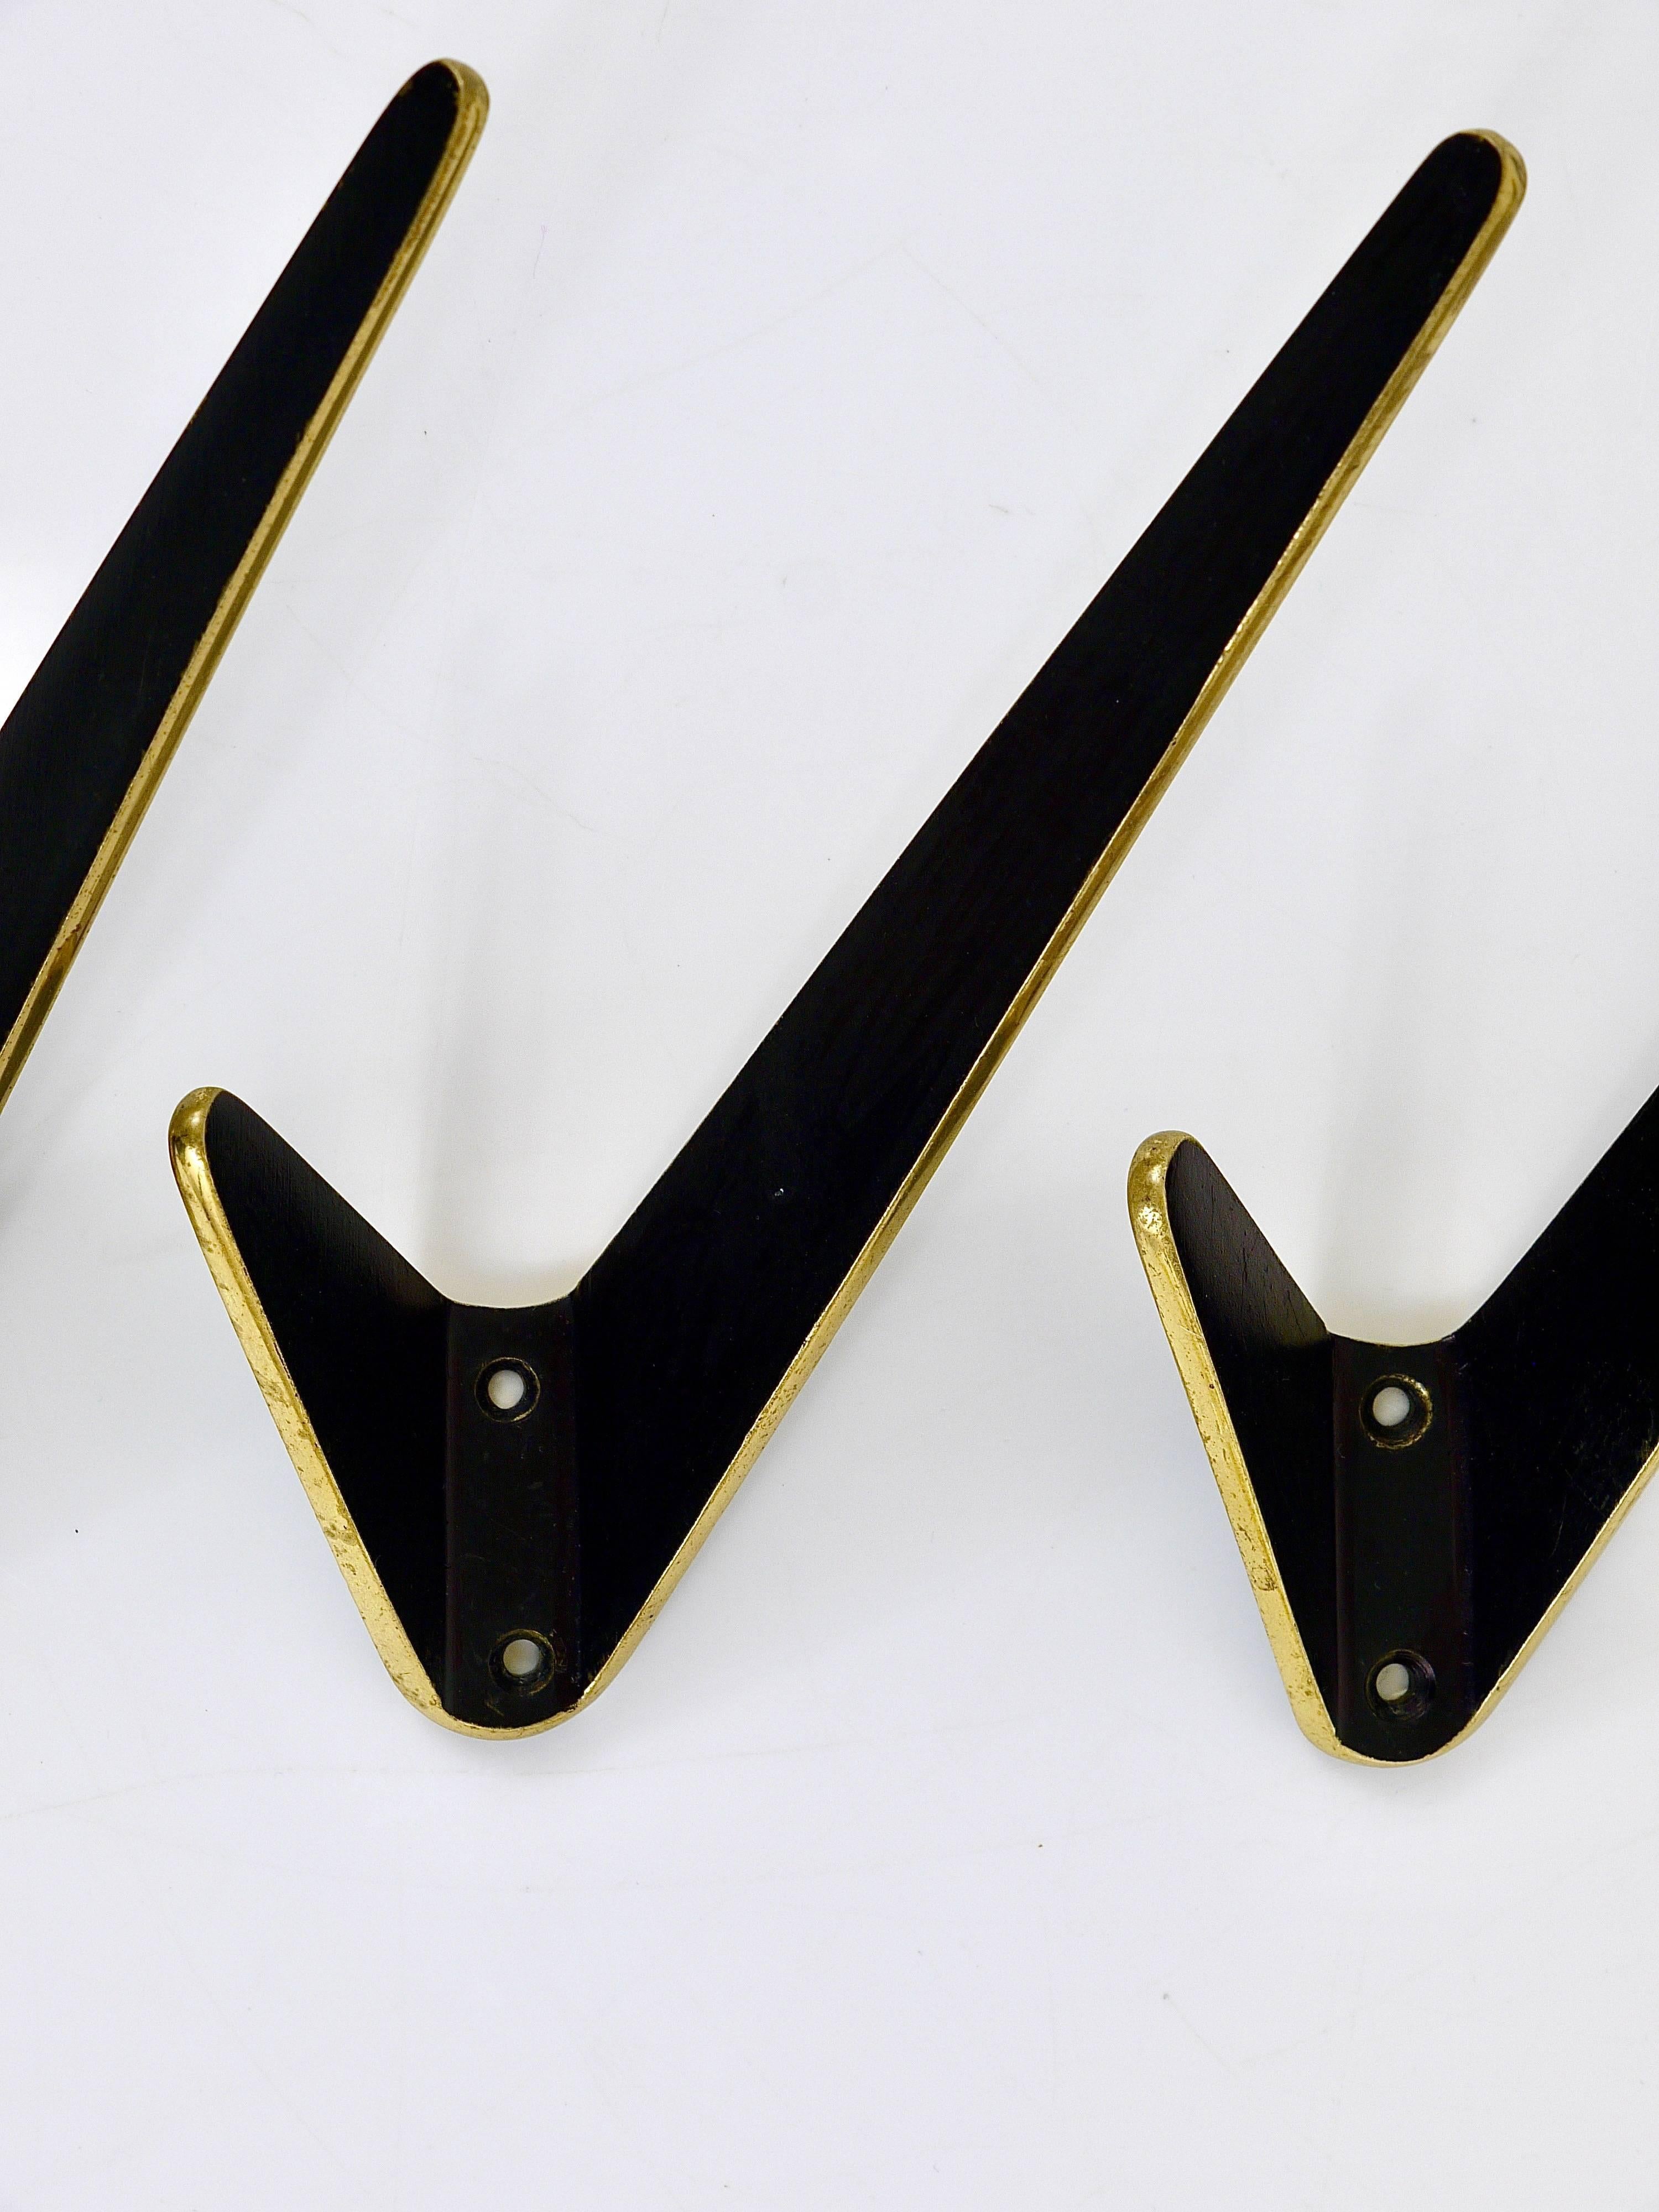 Up to eight beautiful asymmetrical Austrian modernist brass wall coat hooks, crafted in the 1950s. Made of black finished and partly polished brass. Good condition, nice patina. Sold and priced per piece.